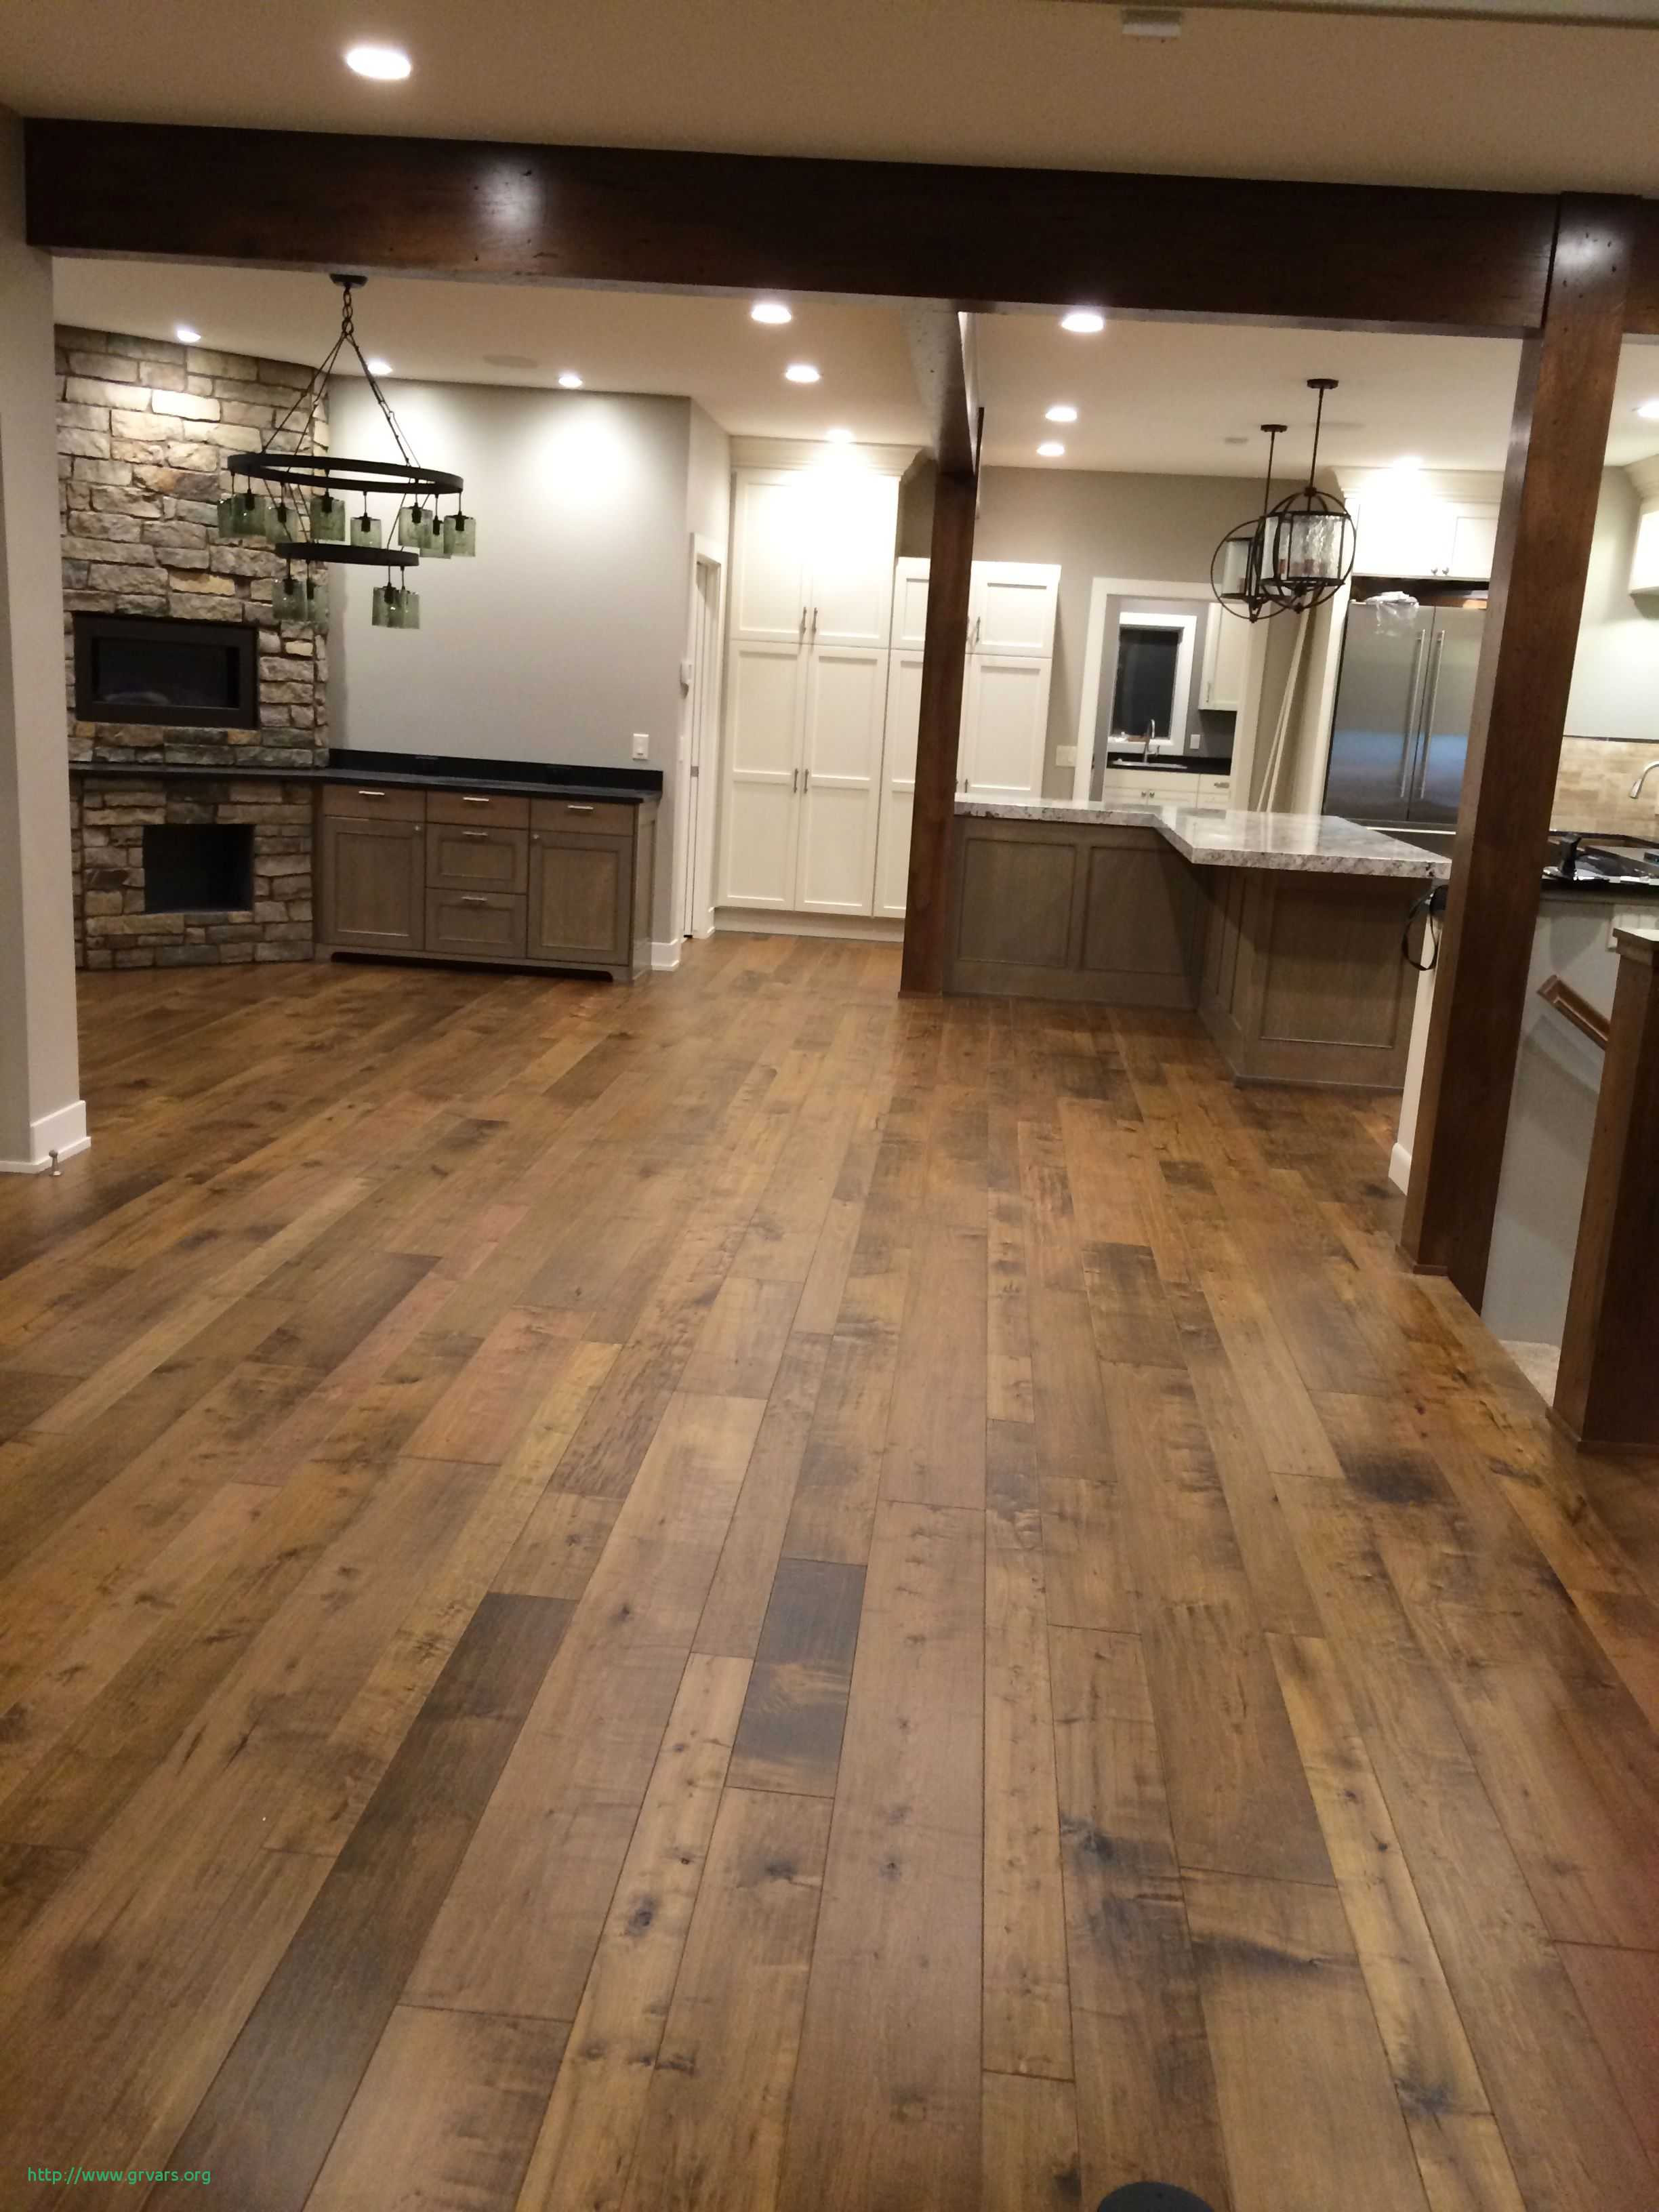 26 Stylish Cost to Install Hardwood Floors Homewyse 2024 free download cost to install hardwood floors homewyse of 17 meilleur de how to install carpet on hardwood floor ideas blog regarding how to install carpet on hardwood floor beau monterey hardwood collect